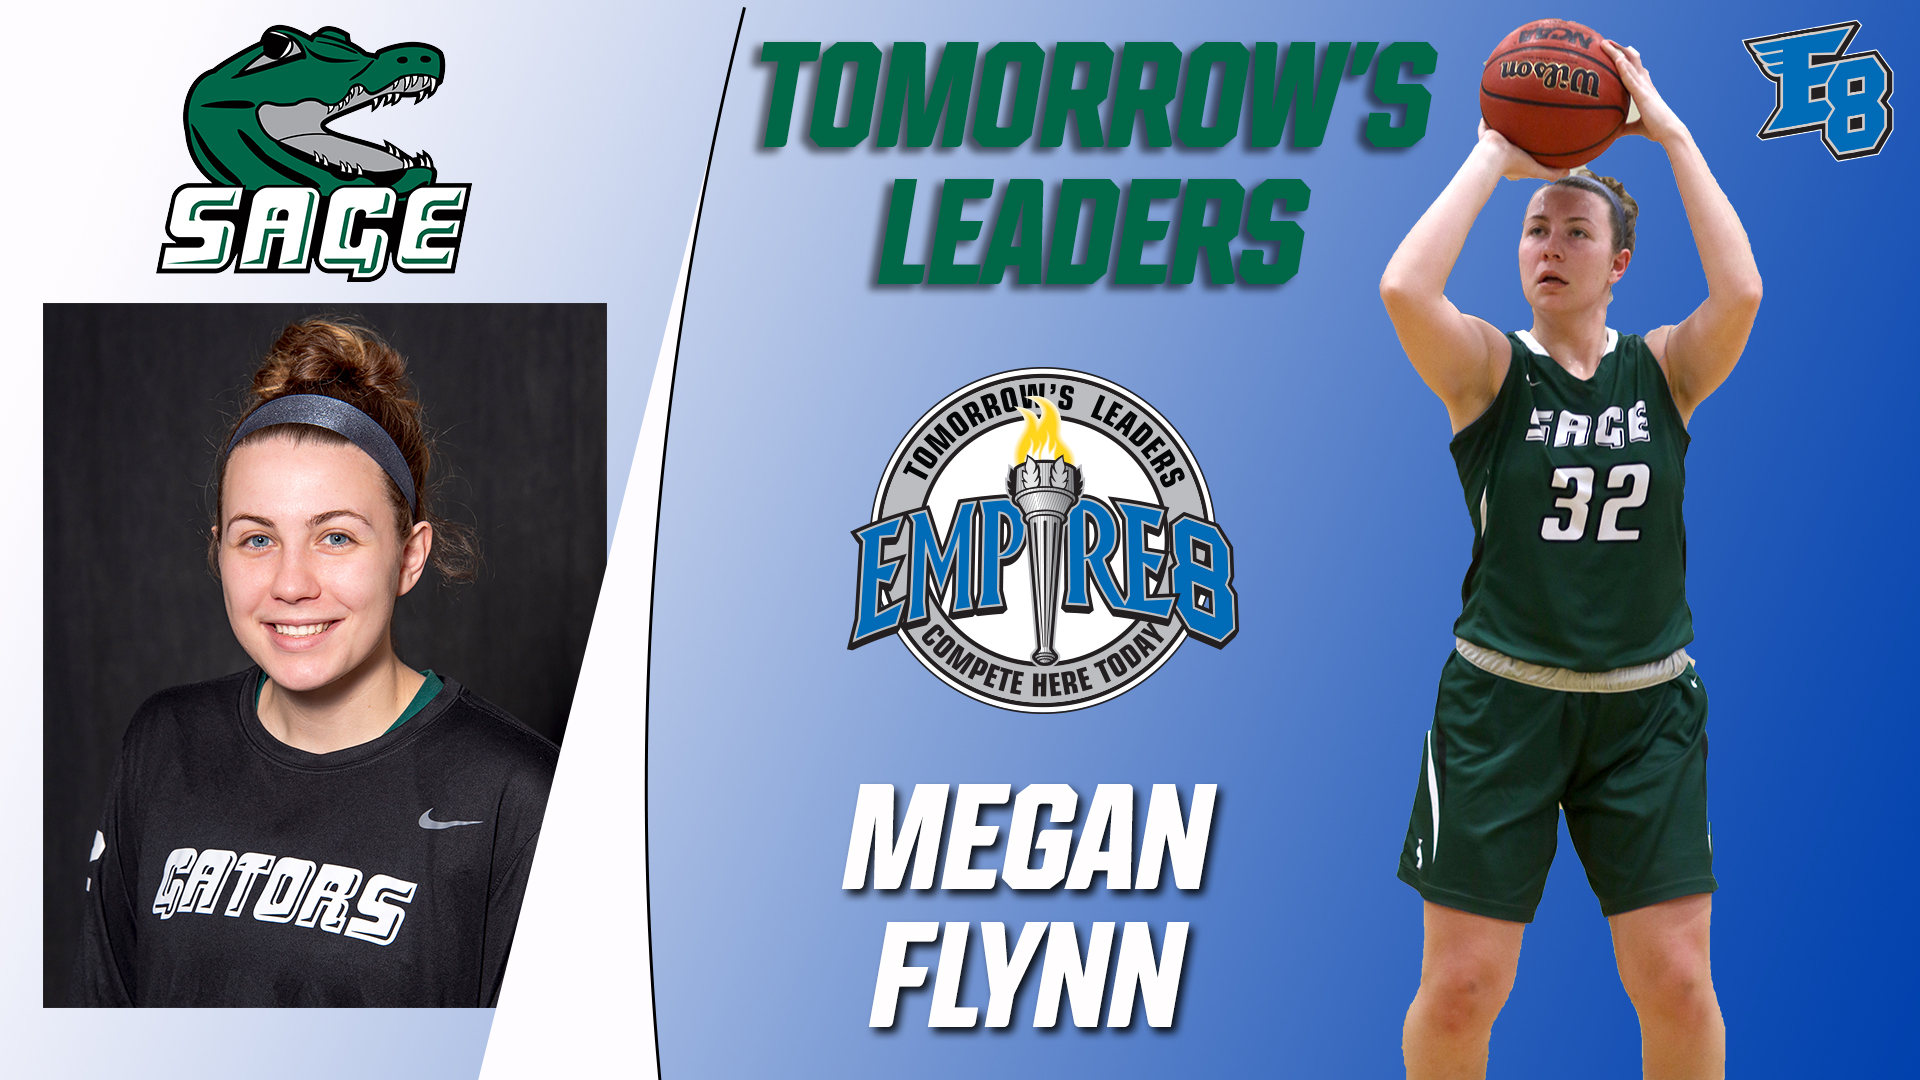 Sage's Megan Flynn Featured by the Empire 8 in the latest Tomorrow's Leaders Compete Here Today